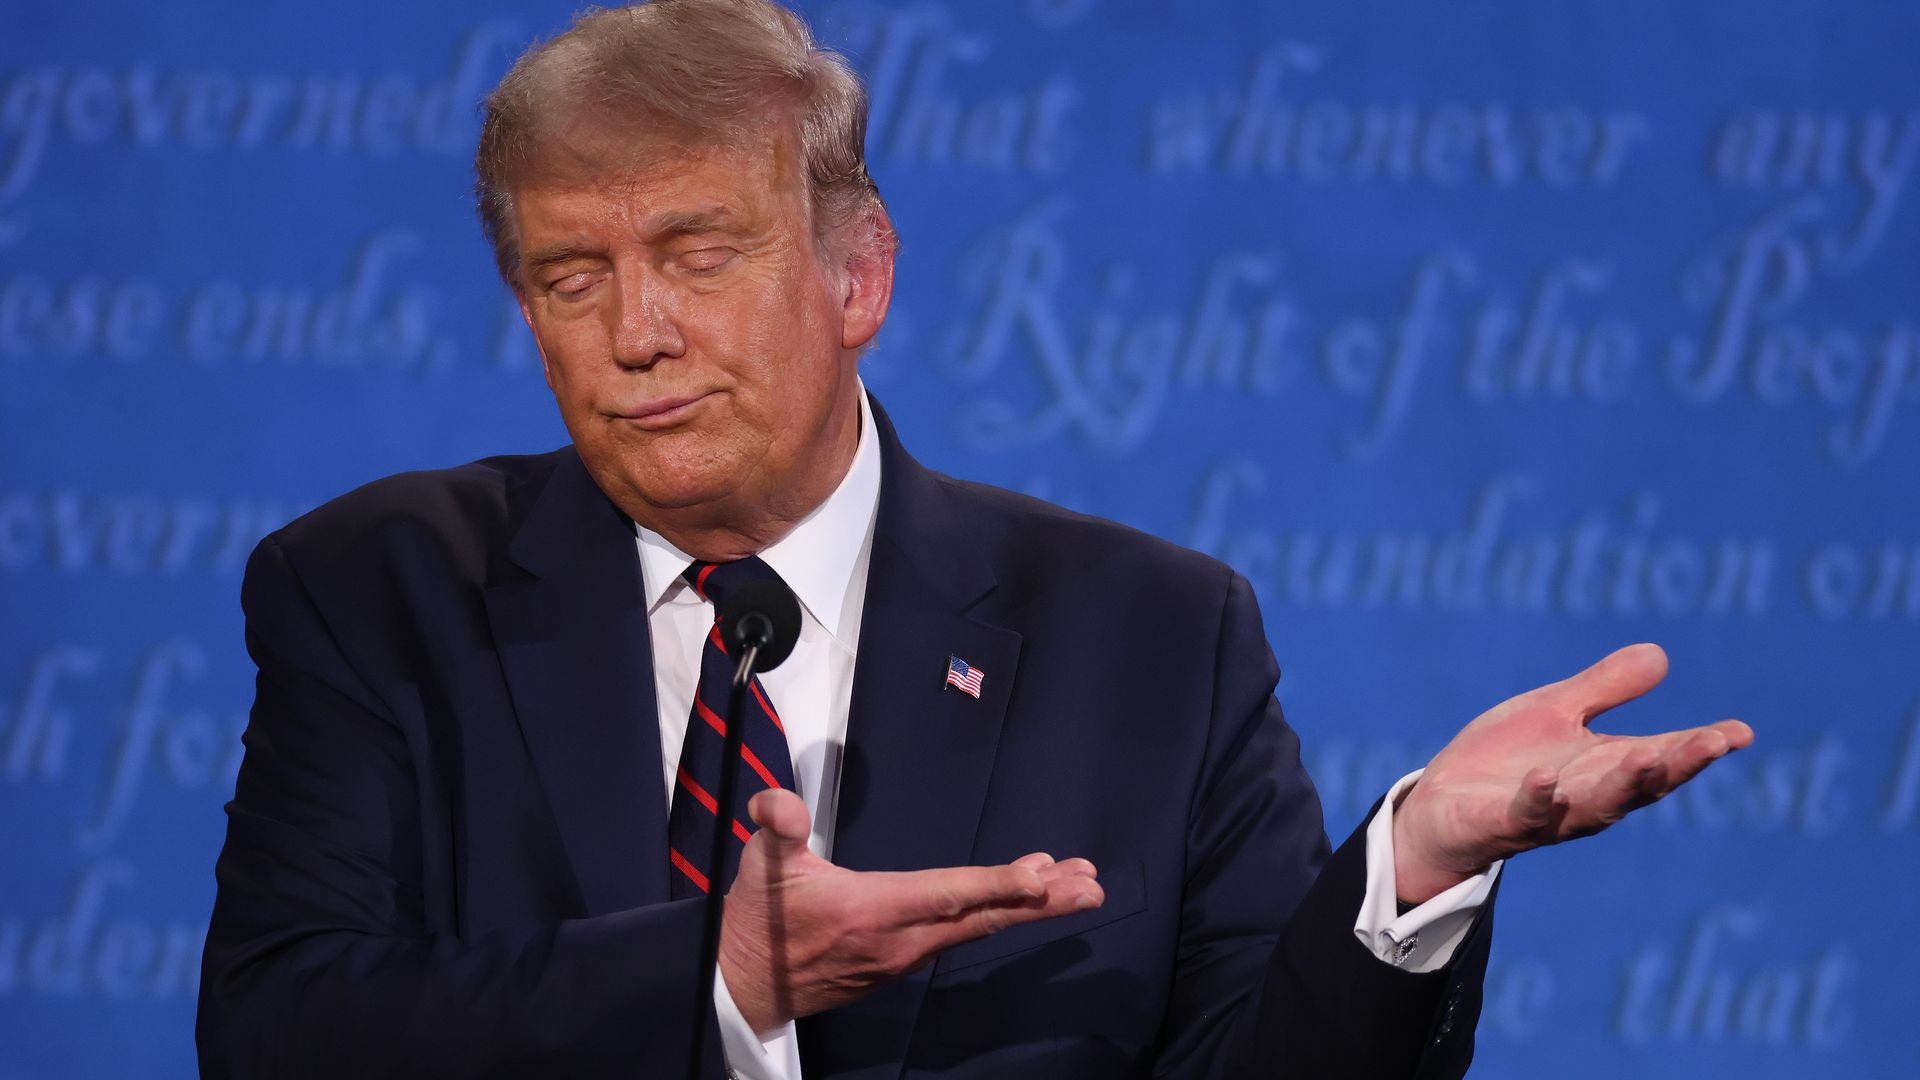 President Trump makes a sarcastic face and gestures to the left during the Sept. 29 presidential debate